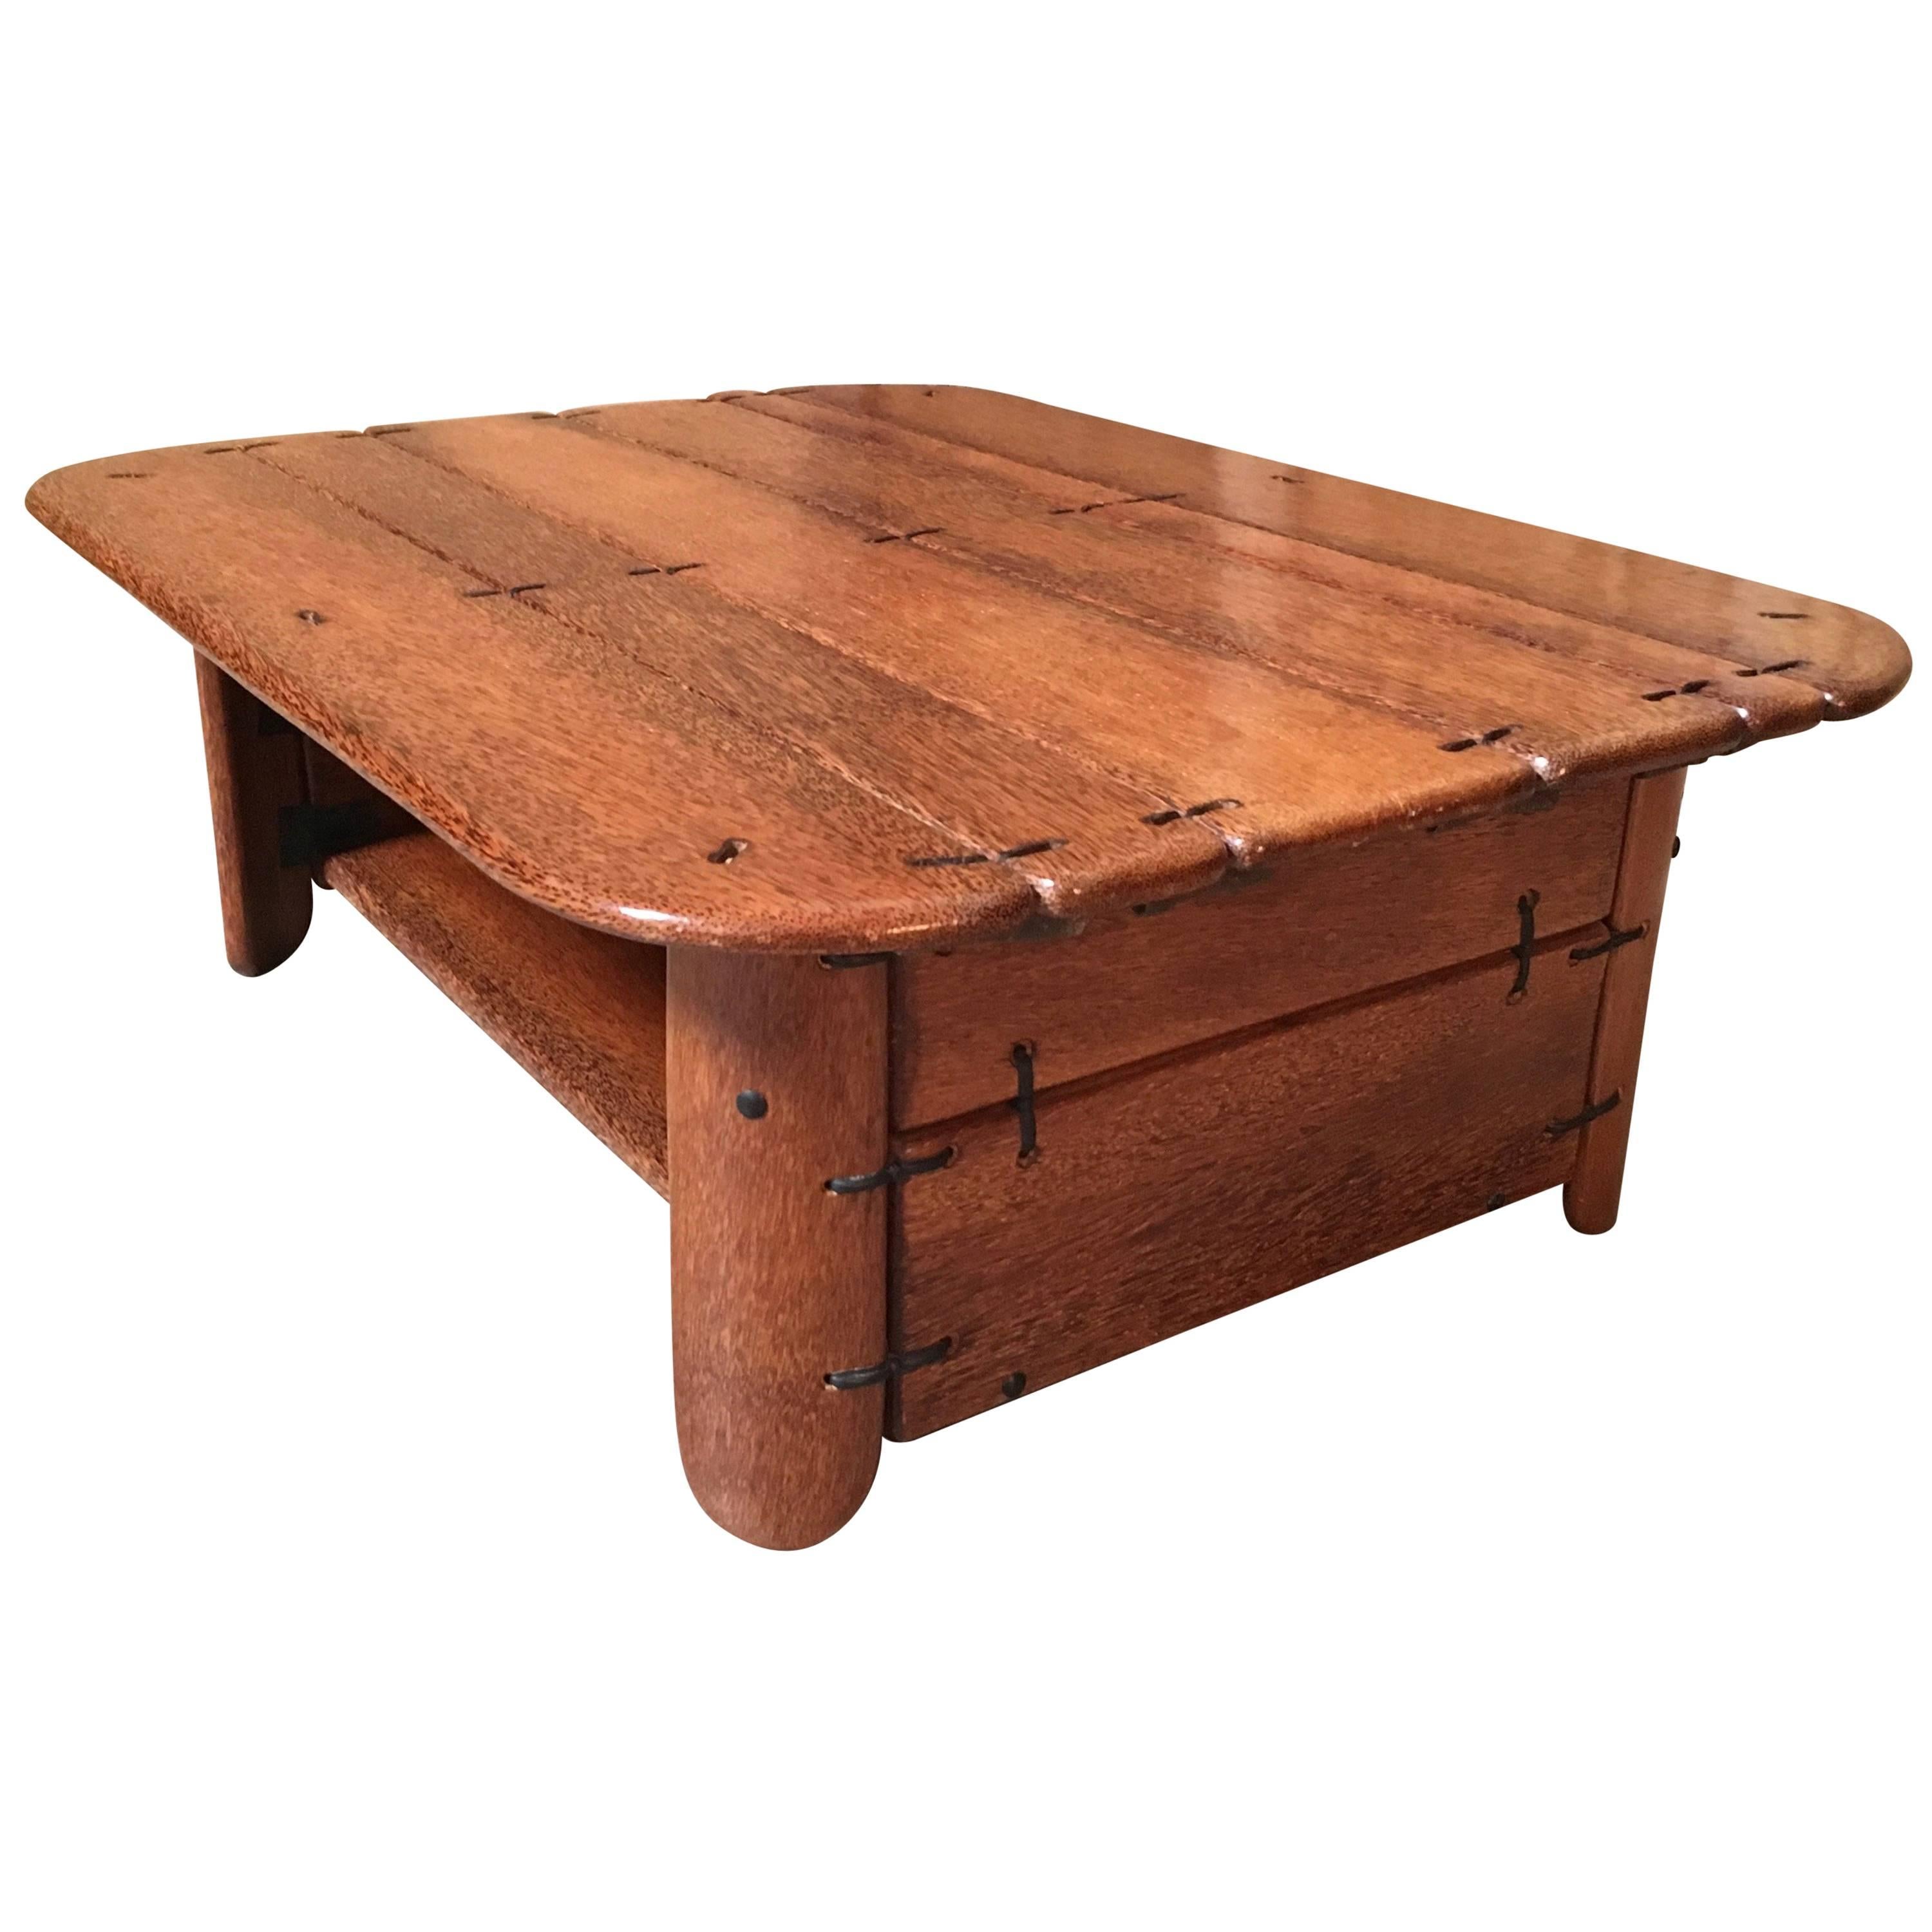 Rustic Modernist Coffee Table by Pacific Green